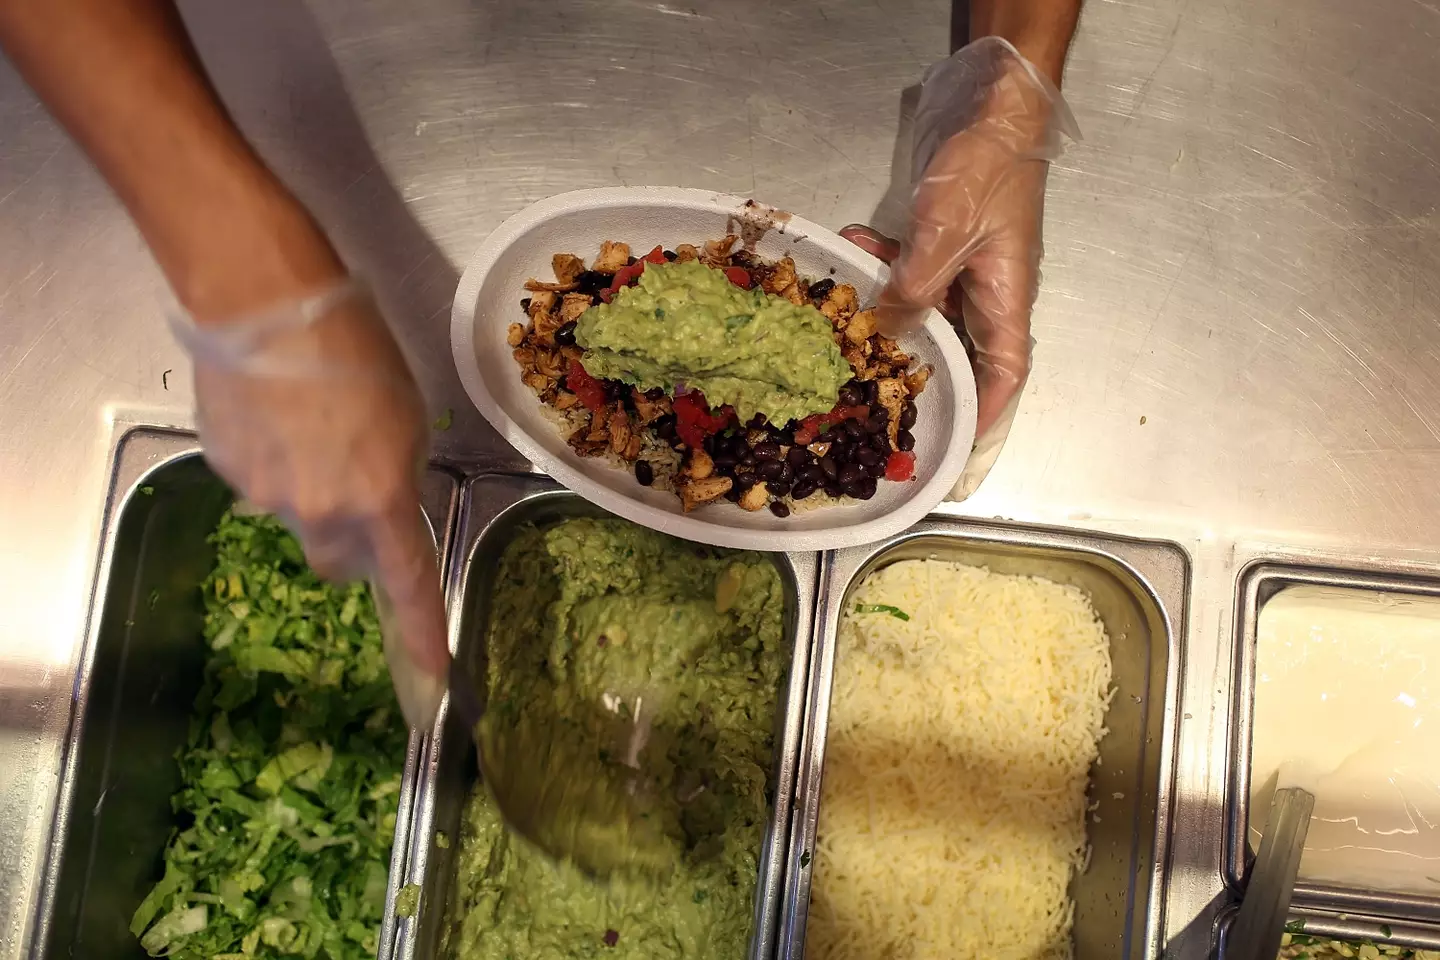 One customer at Chipotle had a less than ideal experience at Chipotle.